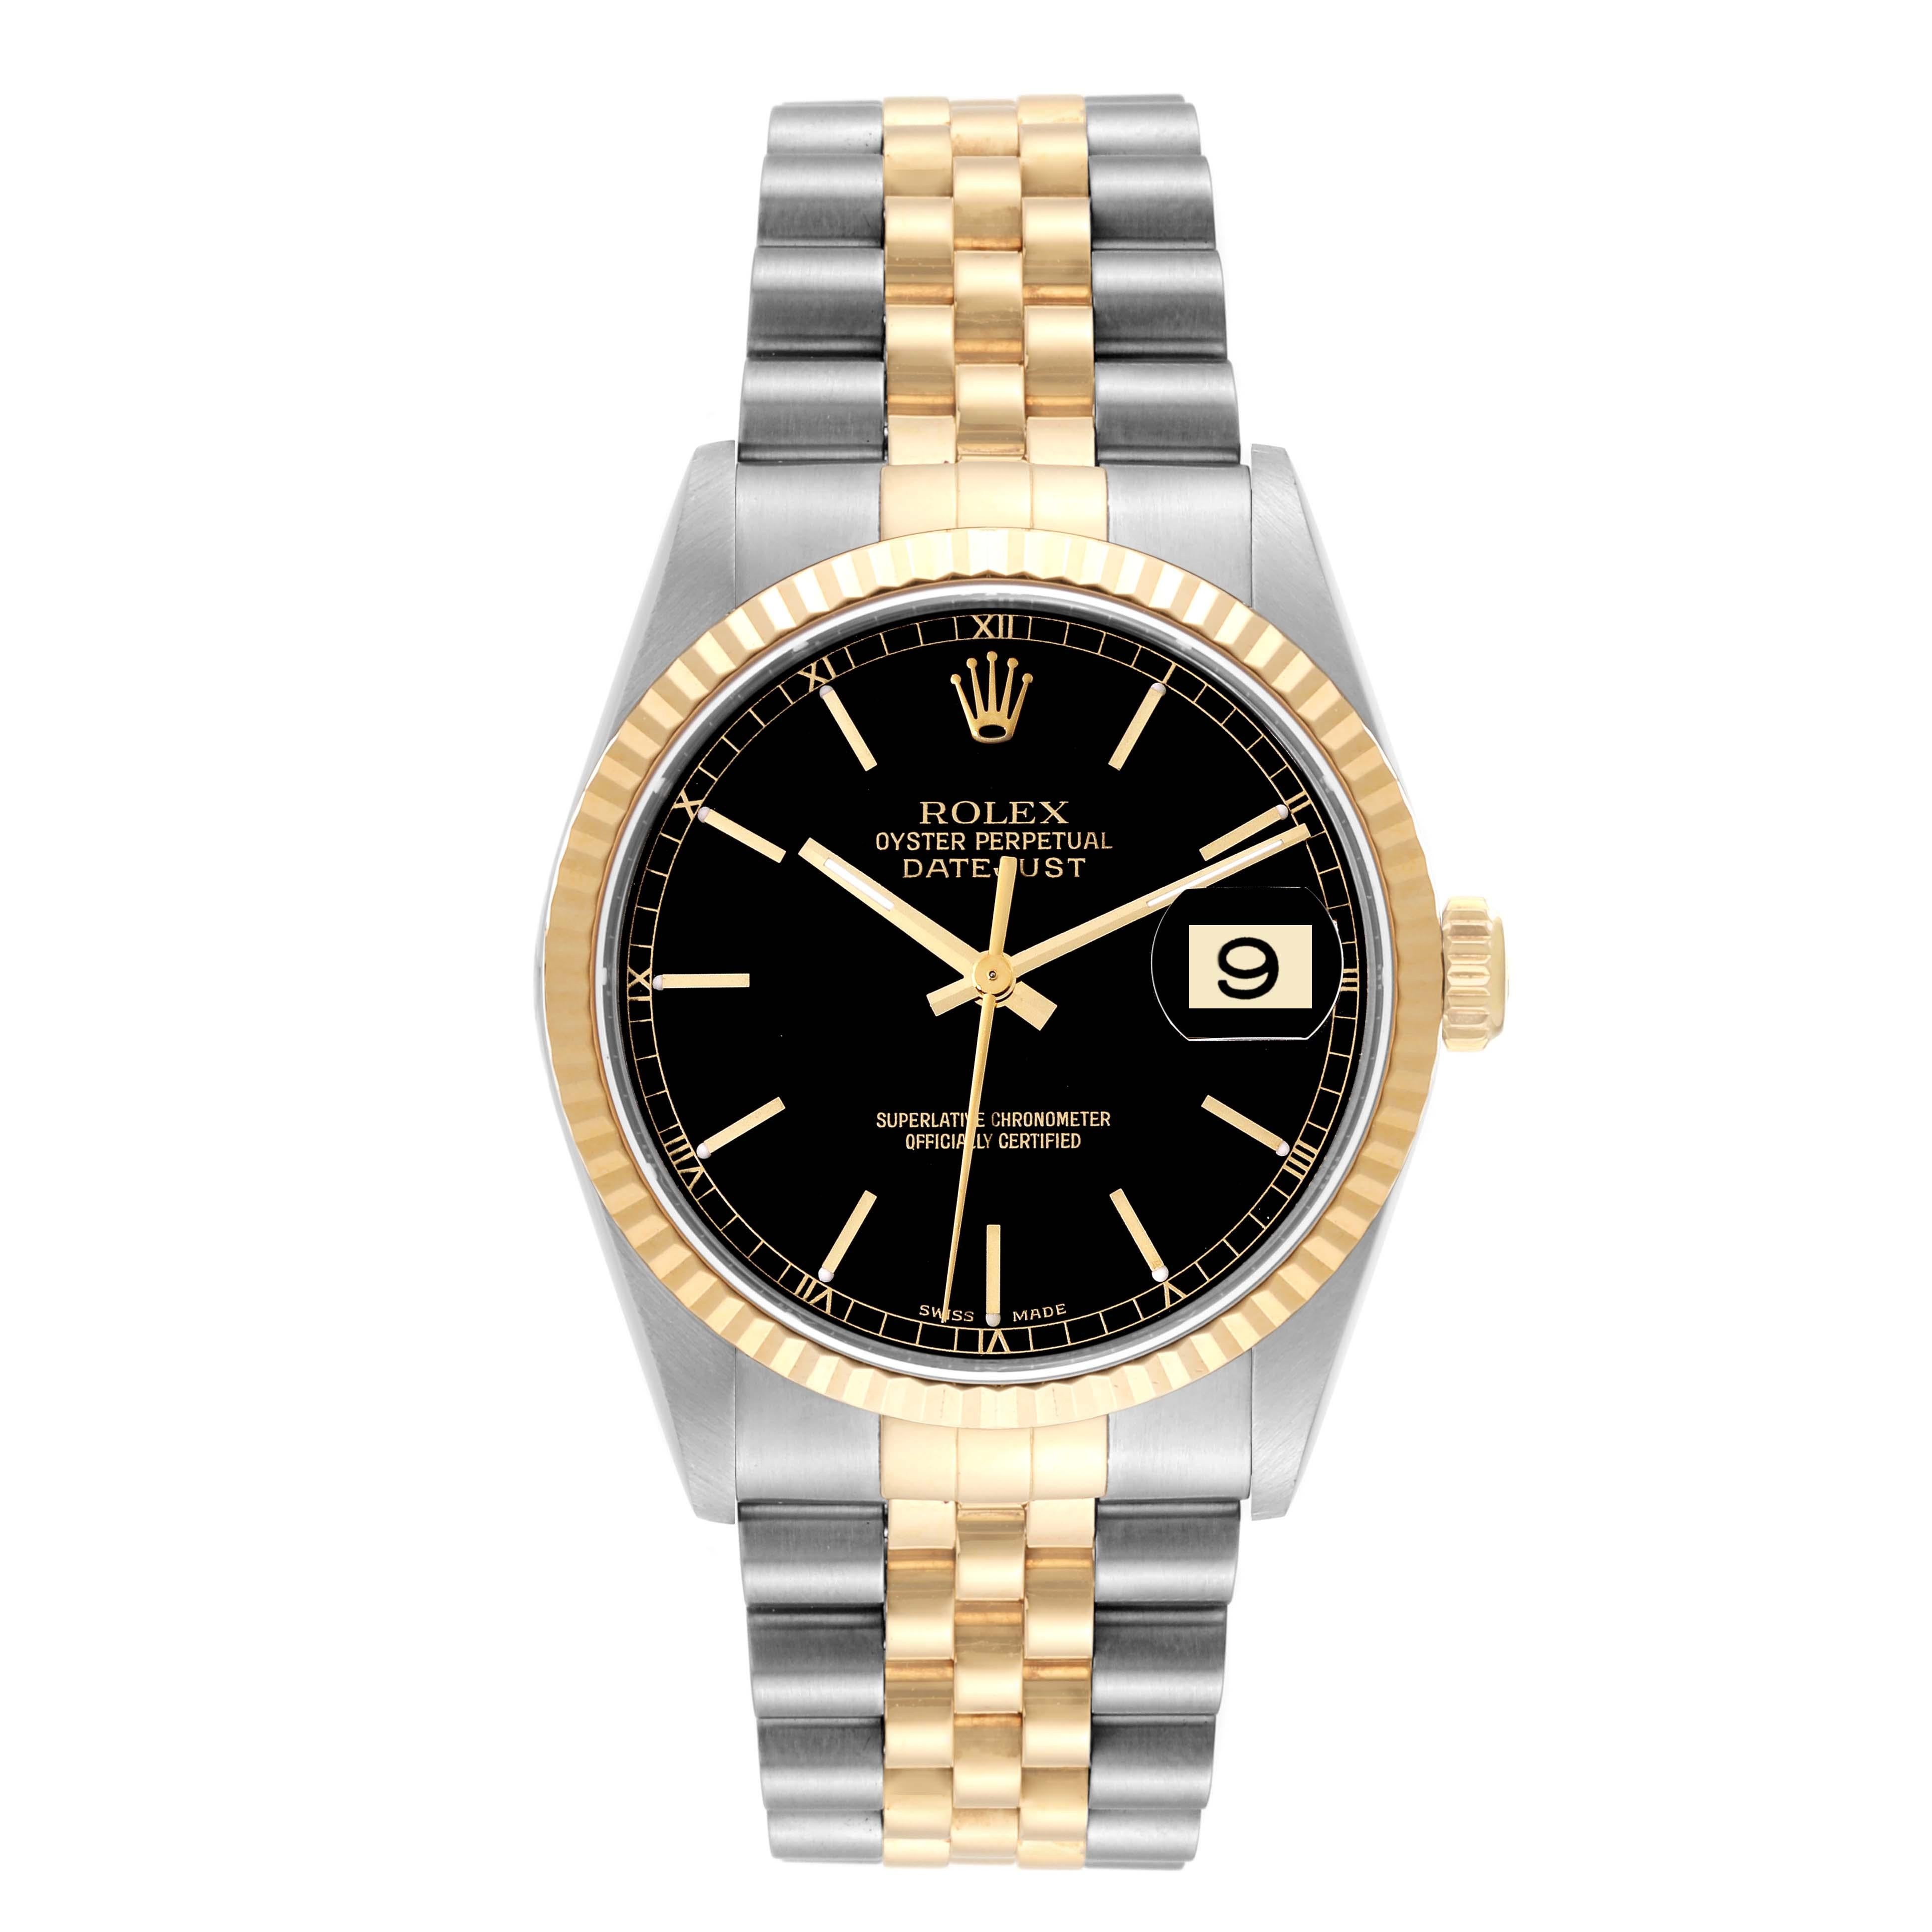 Rolex Datejust 36 Steel Yellow Gold Black Dial Mens Watch 16233. Officially certified chronometer automatic self-winding movement. Stainless steel case 36 mm in diameter.  Rolex logo on an 18K yellow gold crown. 18k yellow gold fluted bezel. Scratch